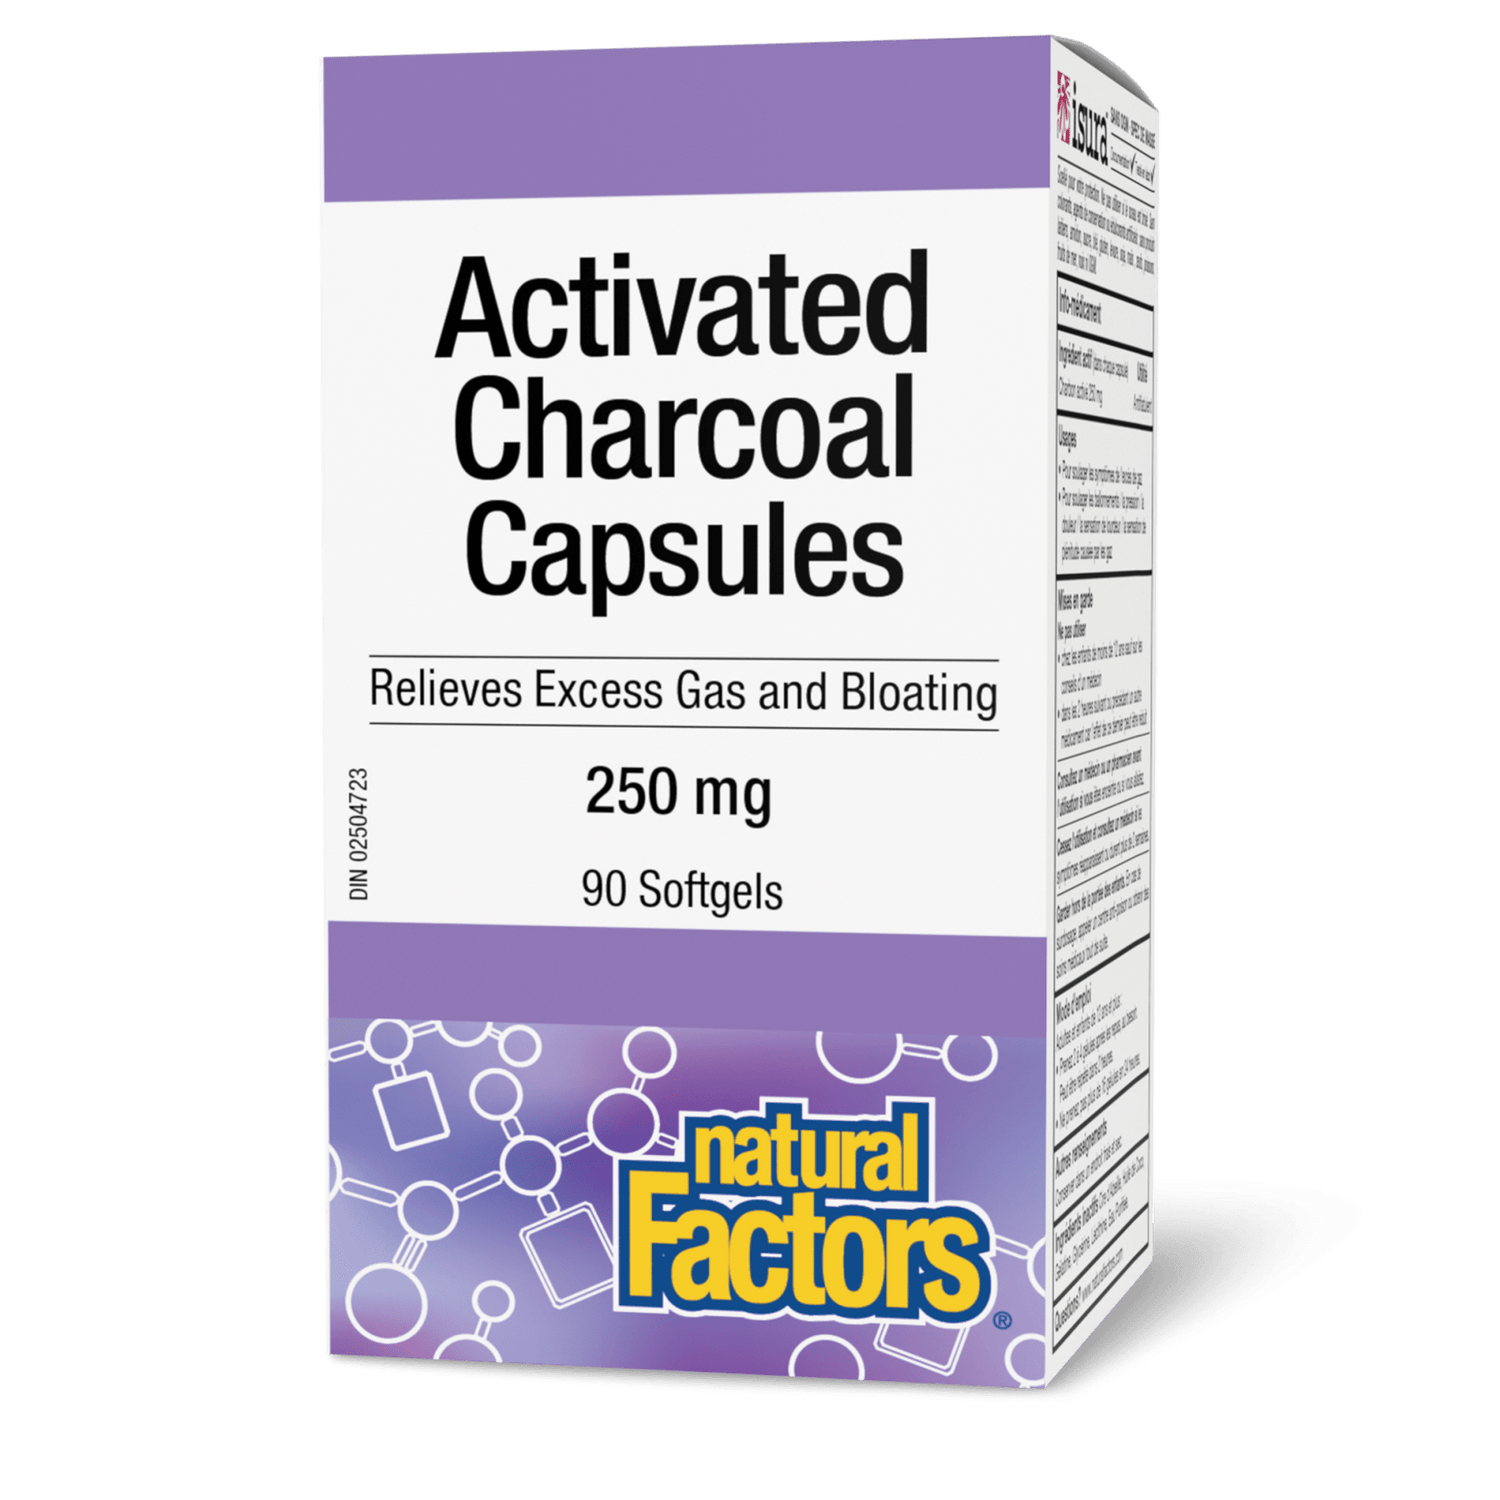 Activated Charcoal Capsules 250 mg, Natural Factors|v|image|1702